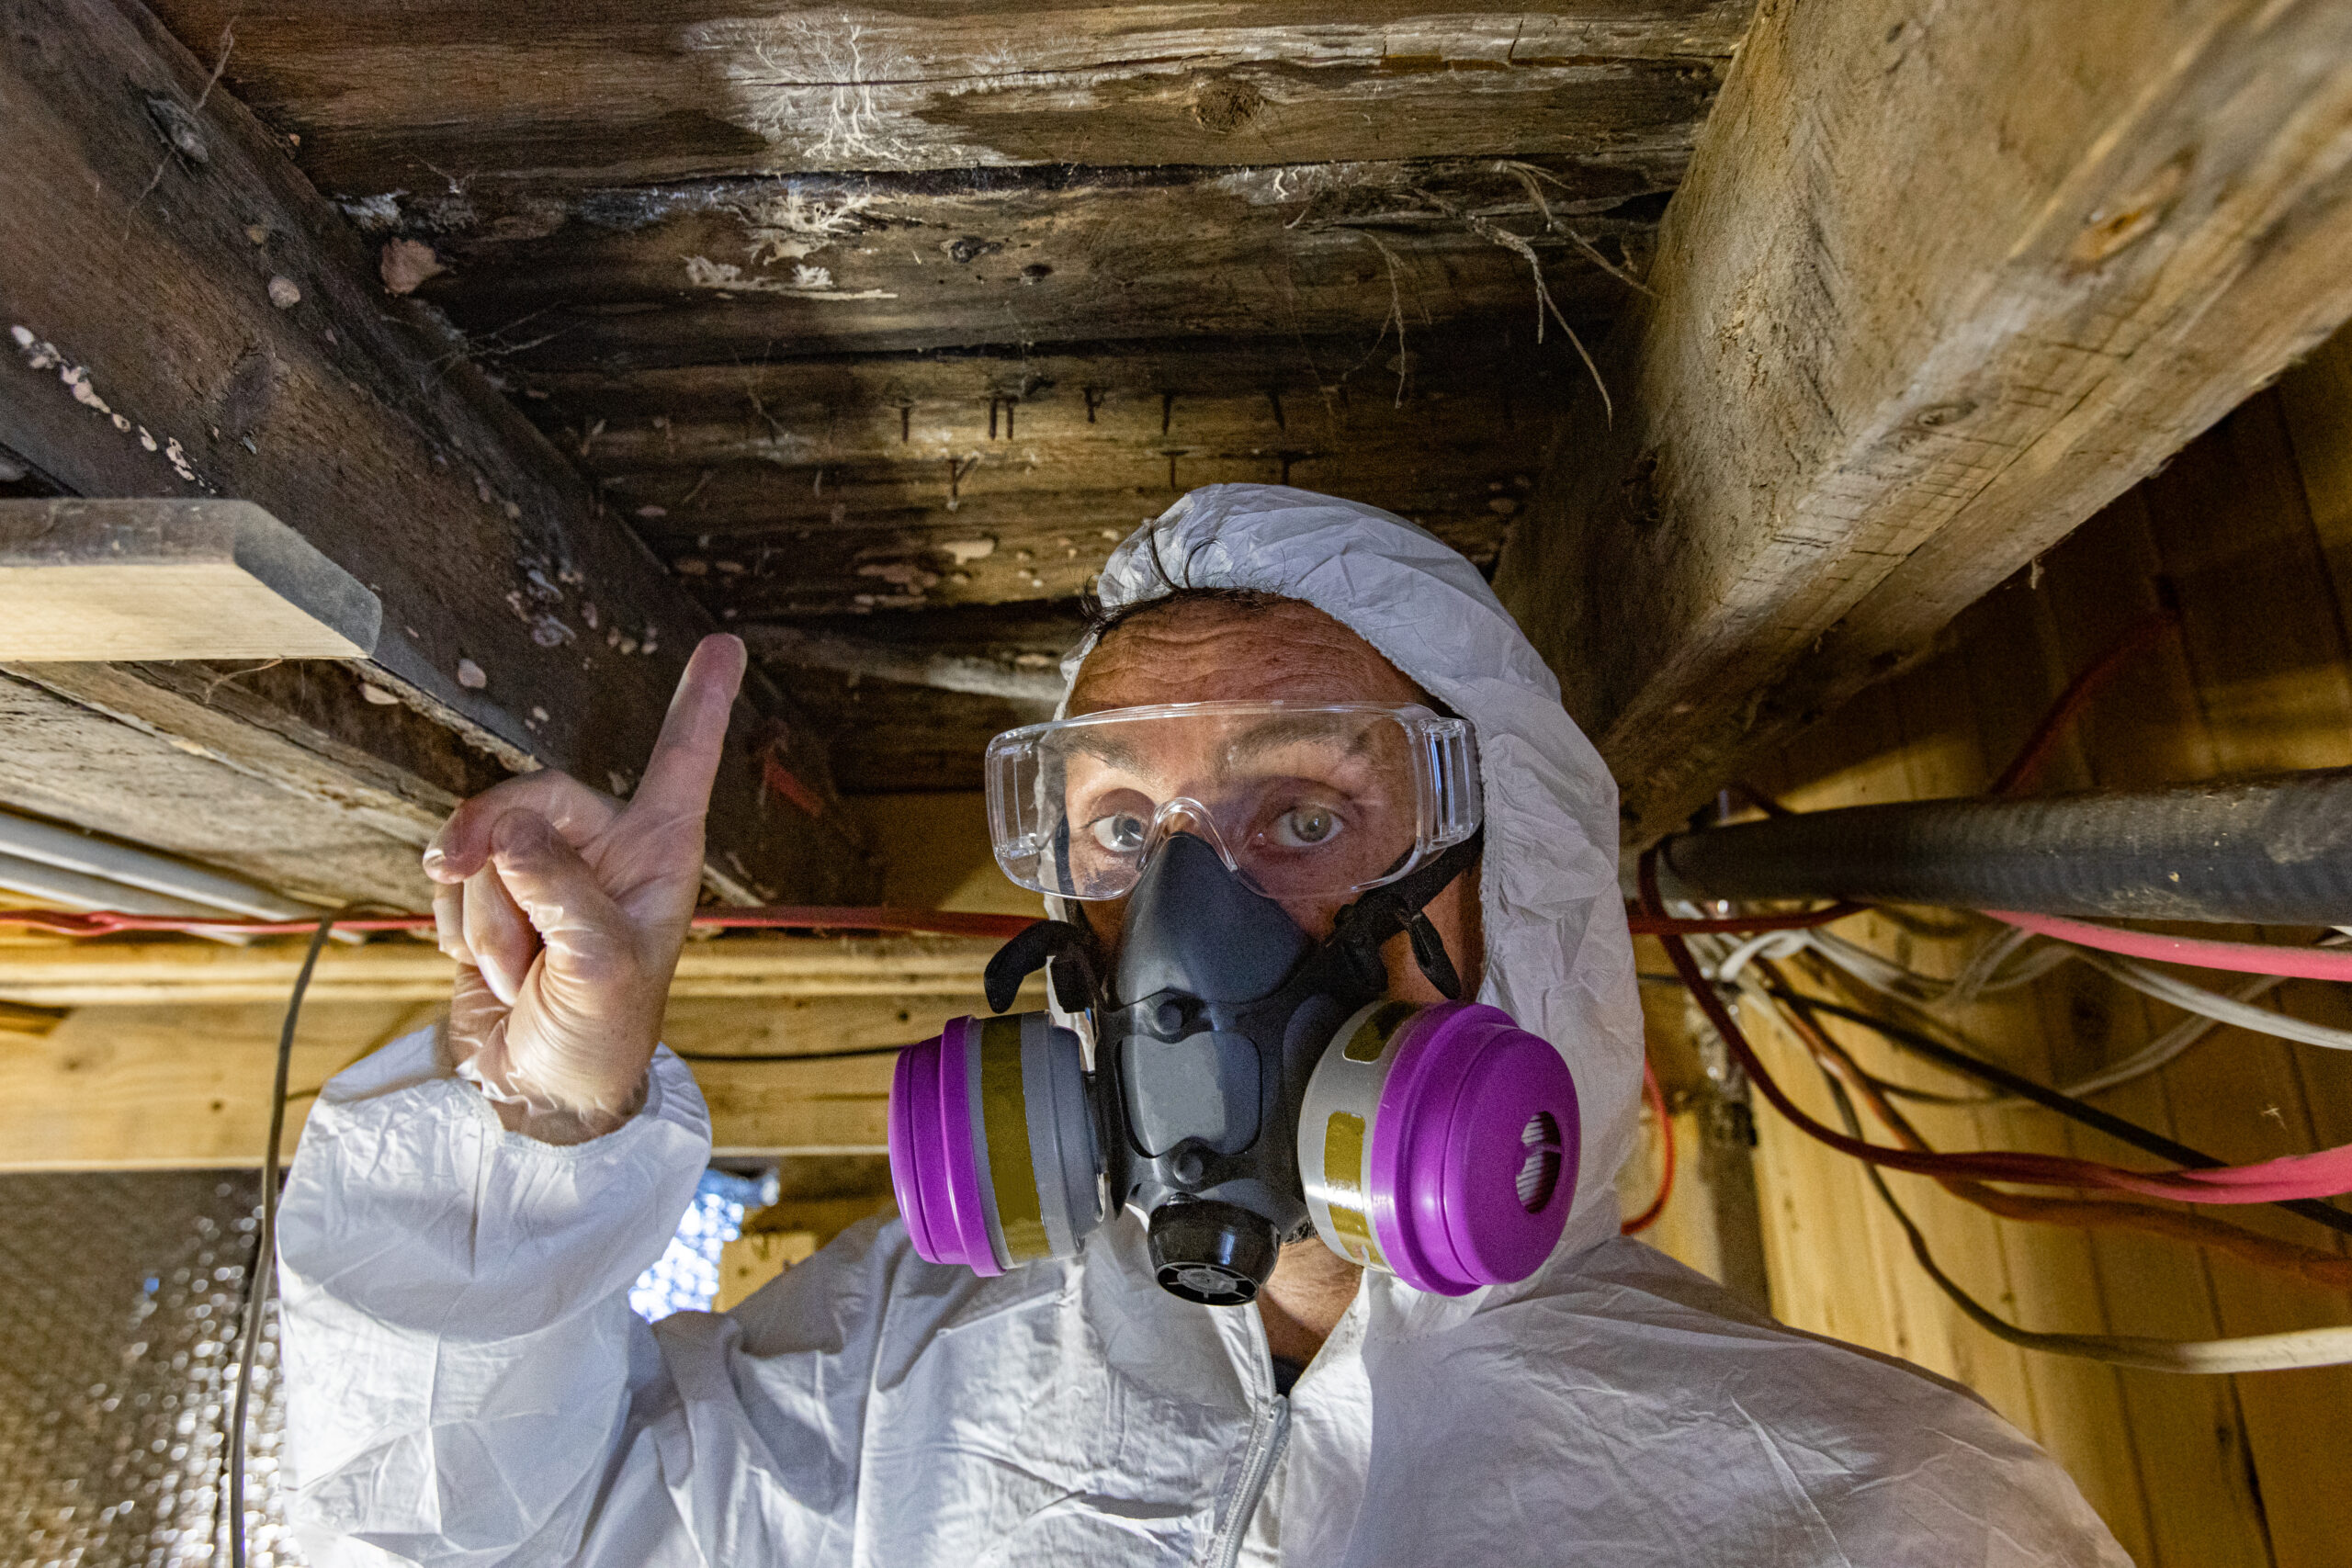 Keep Mold Out of Your Home: An indoor home inspector points towards condemned wood inside a domestic building, white fungi are seen growing on joists and floor planks, rotting wood indoor